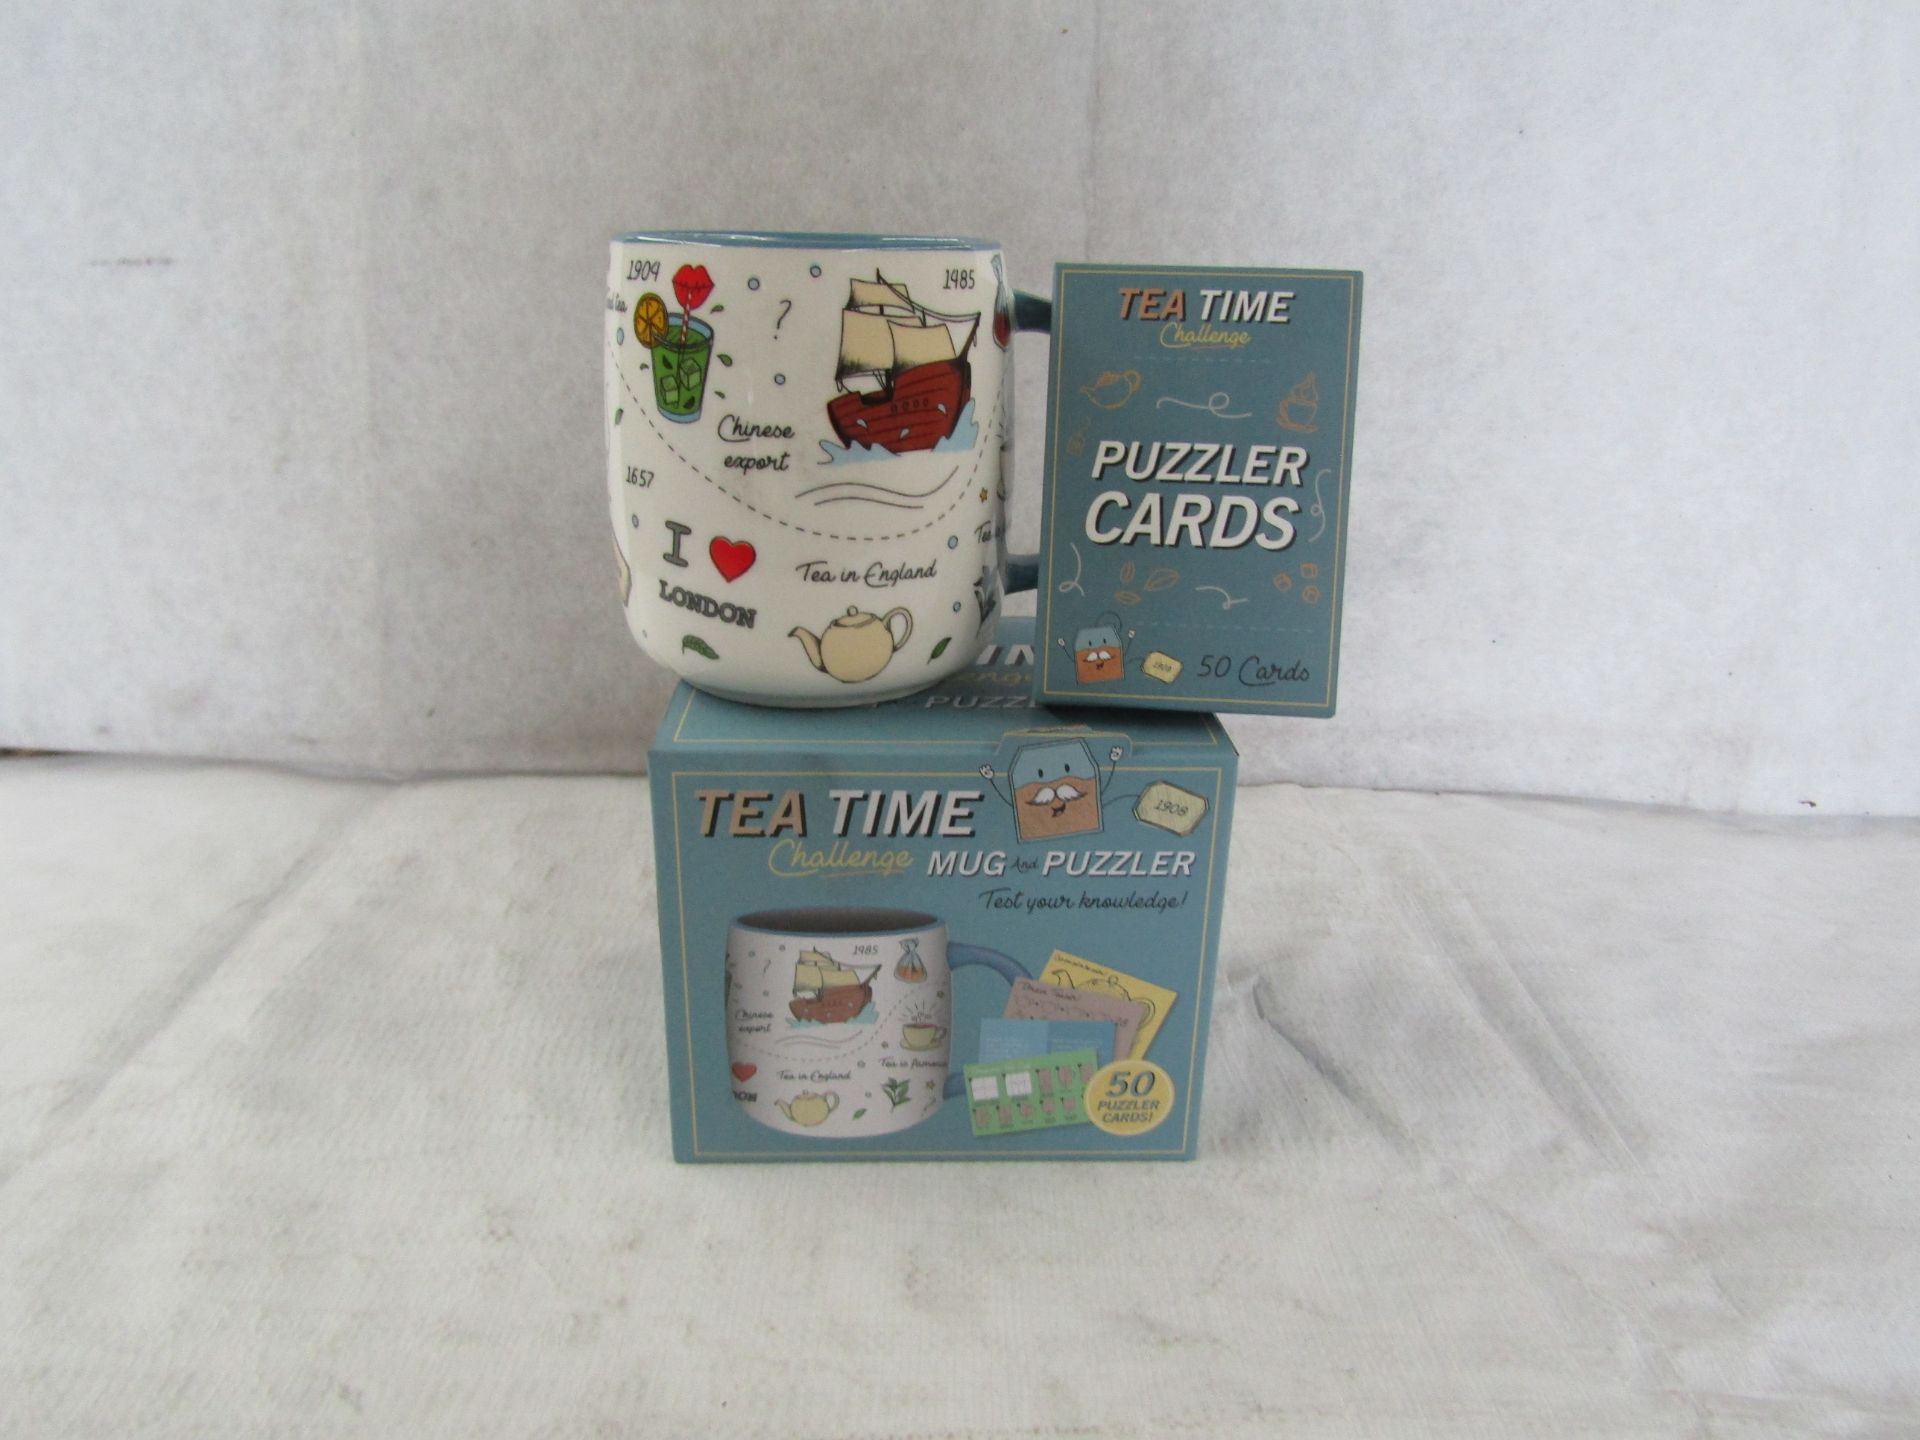 24X Teatime Challenge Puzzler - Includes 1x Mug & 50 Puzzler Cards - New & Boxed.